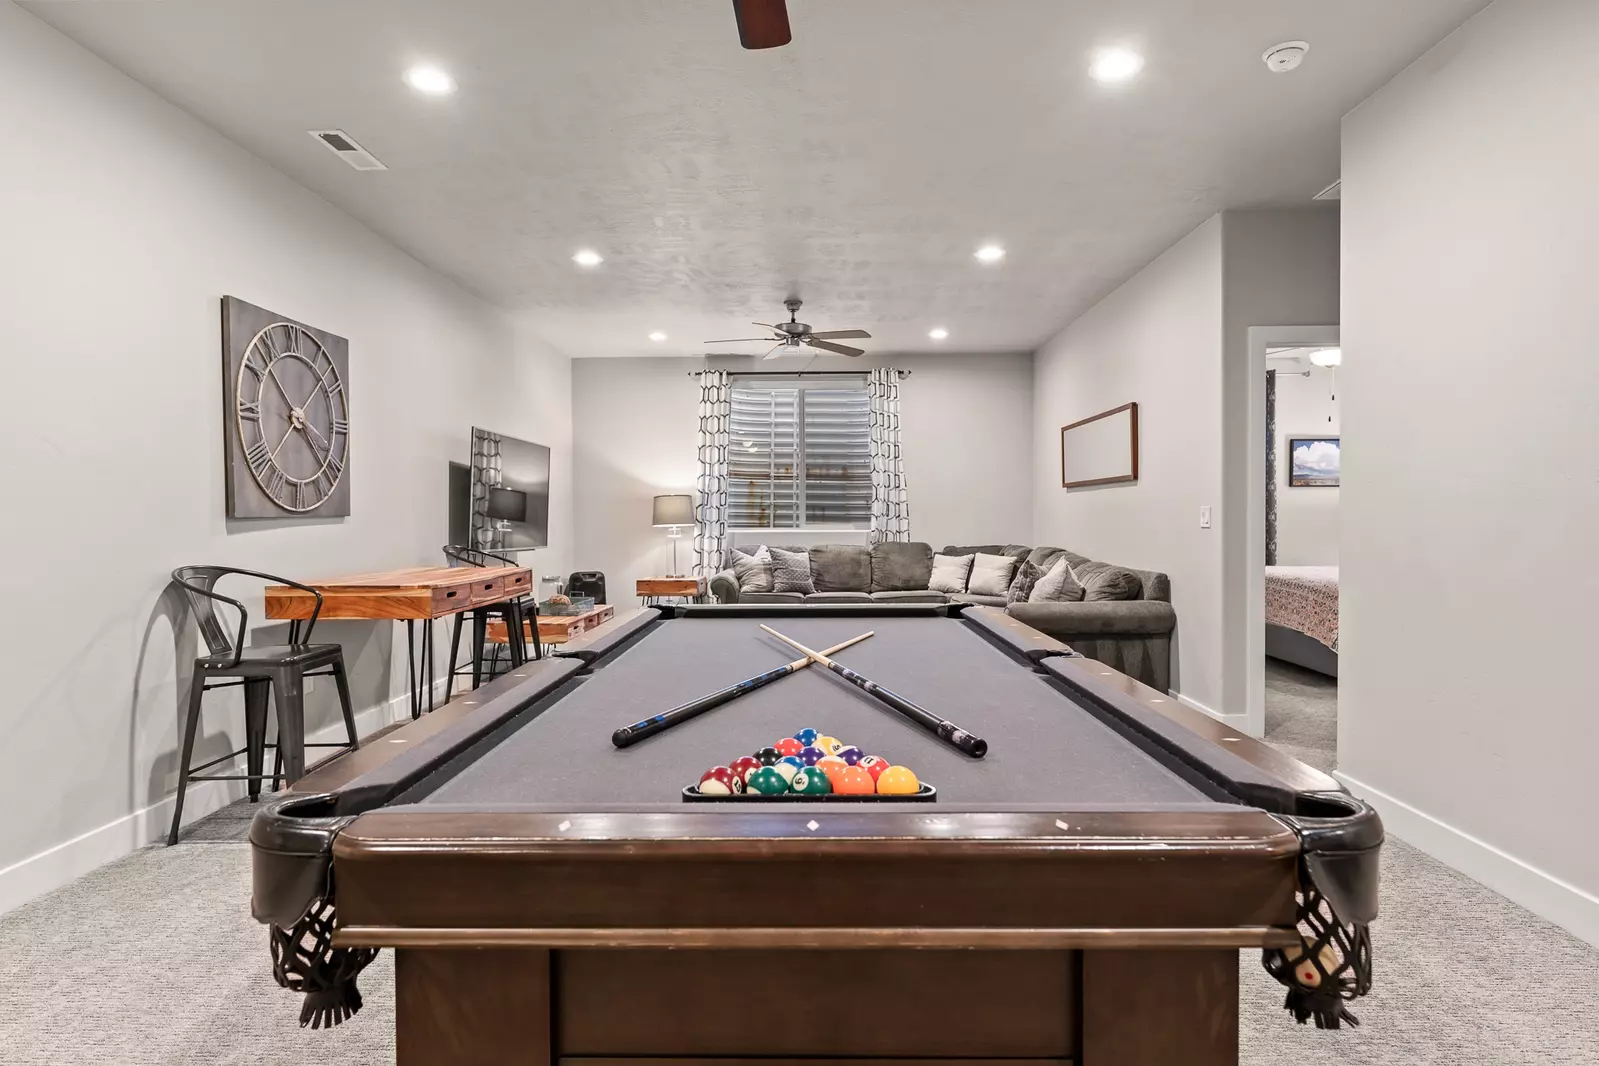 Pool Table, Family Room